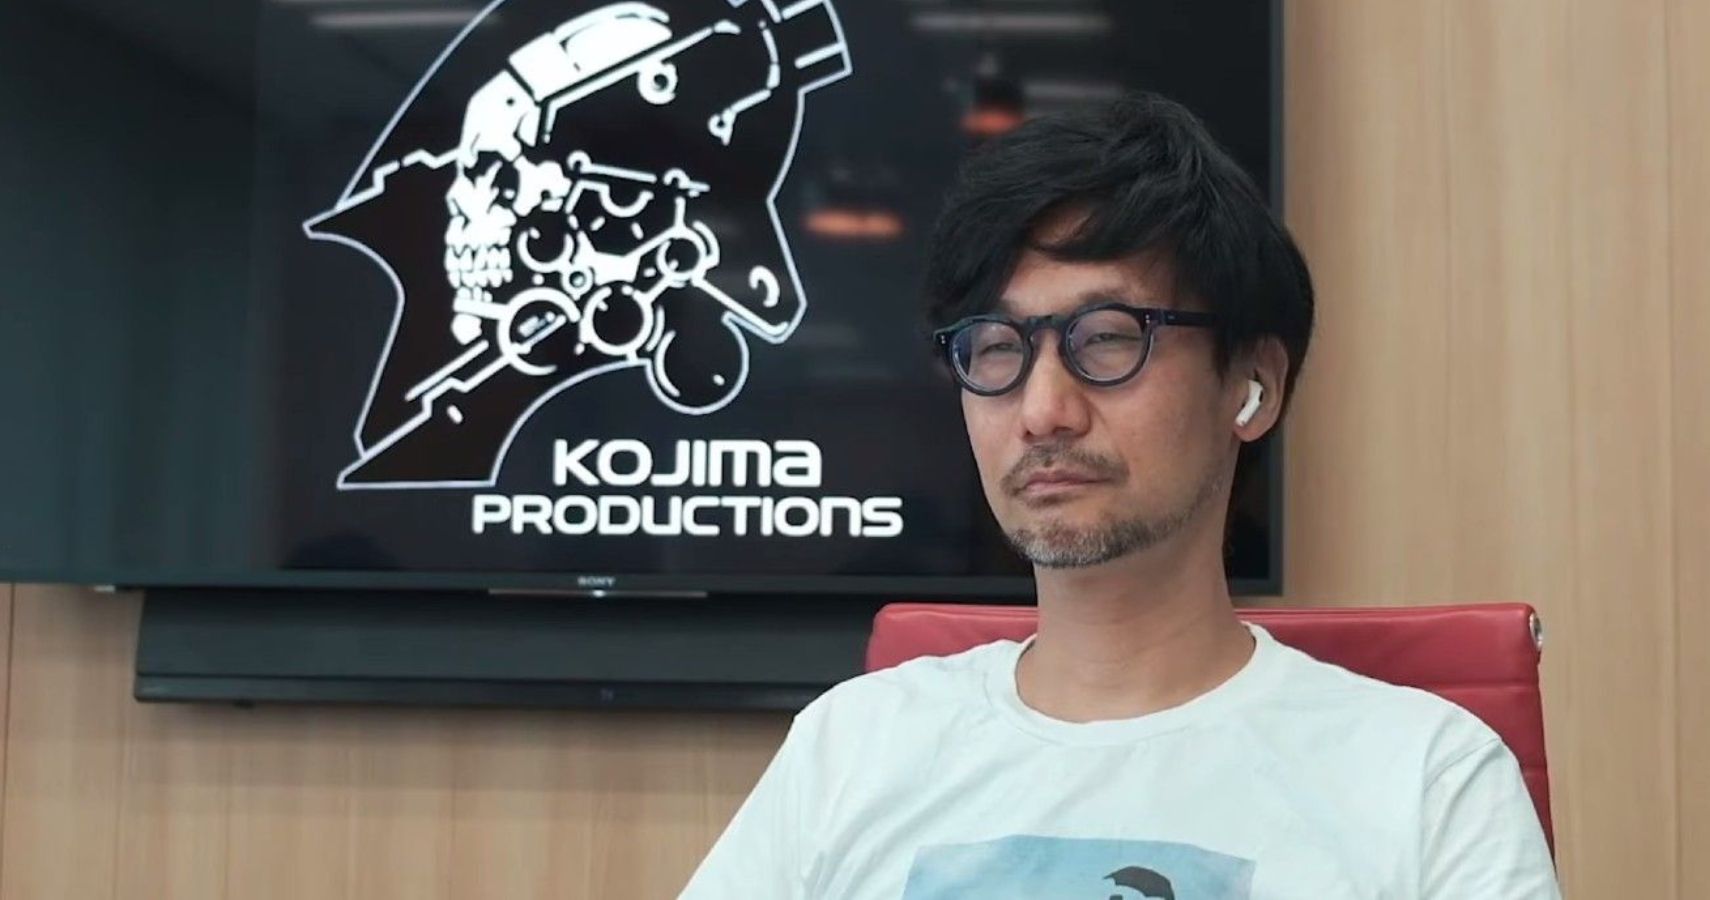 KOJIMA PRODUCTIONS (Eng) on X: Hideo Kojima Receives the Minister of  Education Award for Fine Arts from the Agency of Cultural Affairs,  Government of Japan. #AgencyforCulturalAffairs  / X